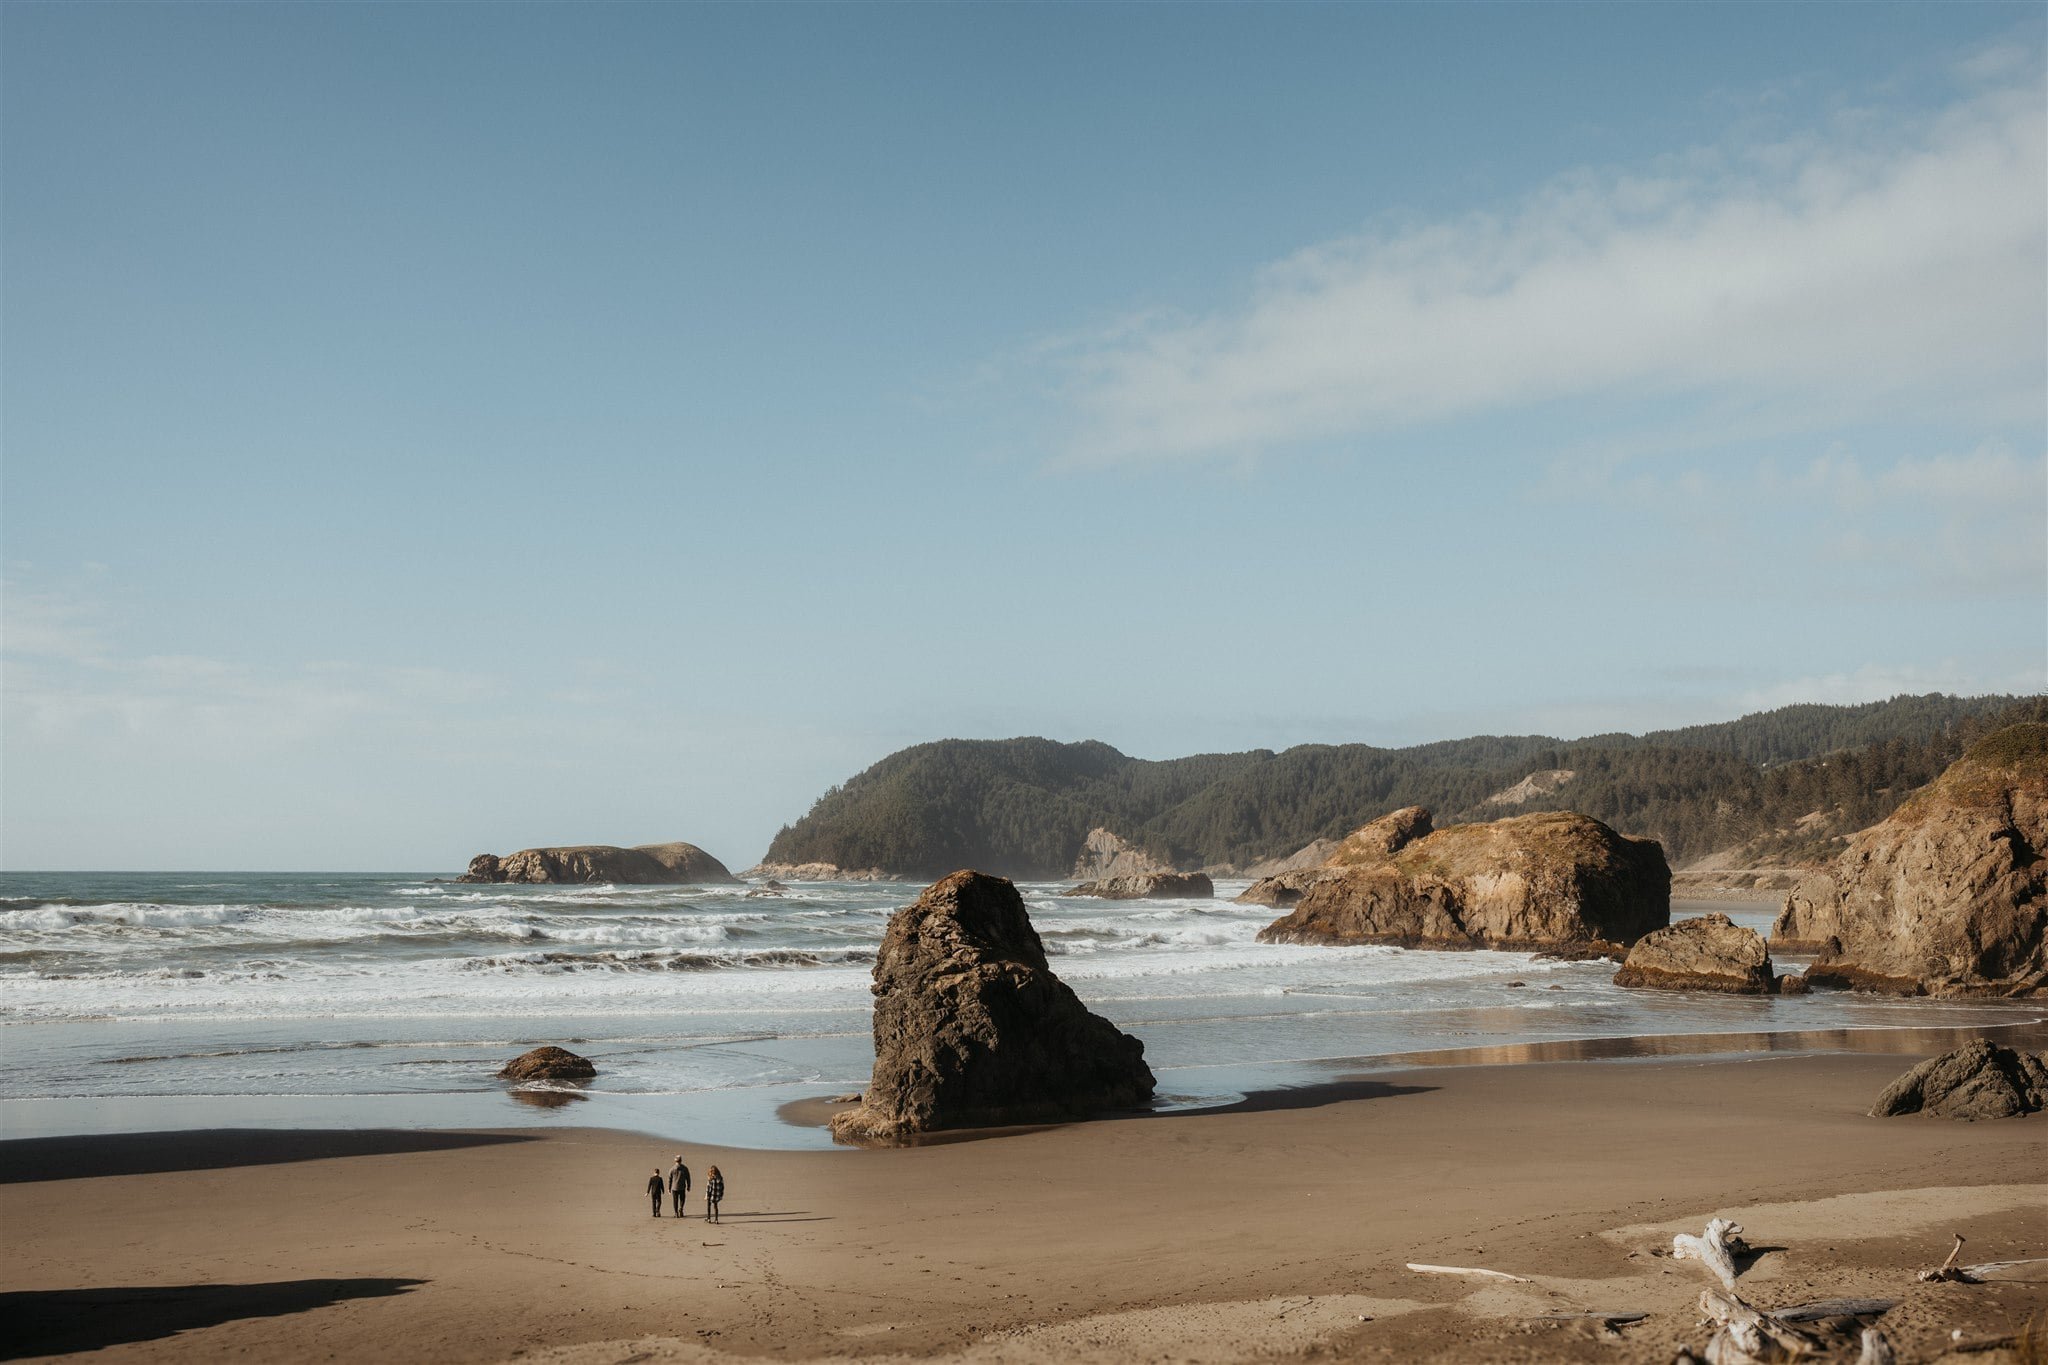 Brides walk across the beach during their Pacific Northwest elopement